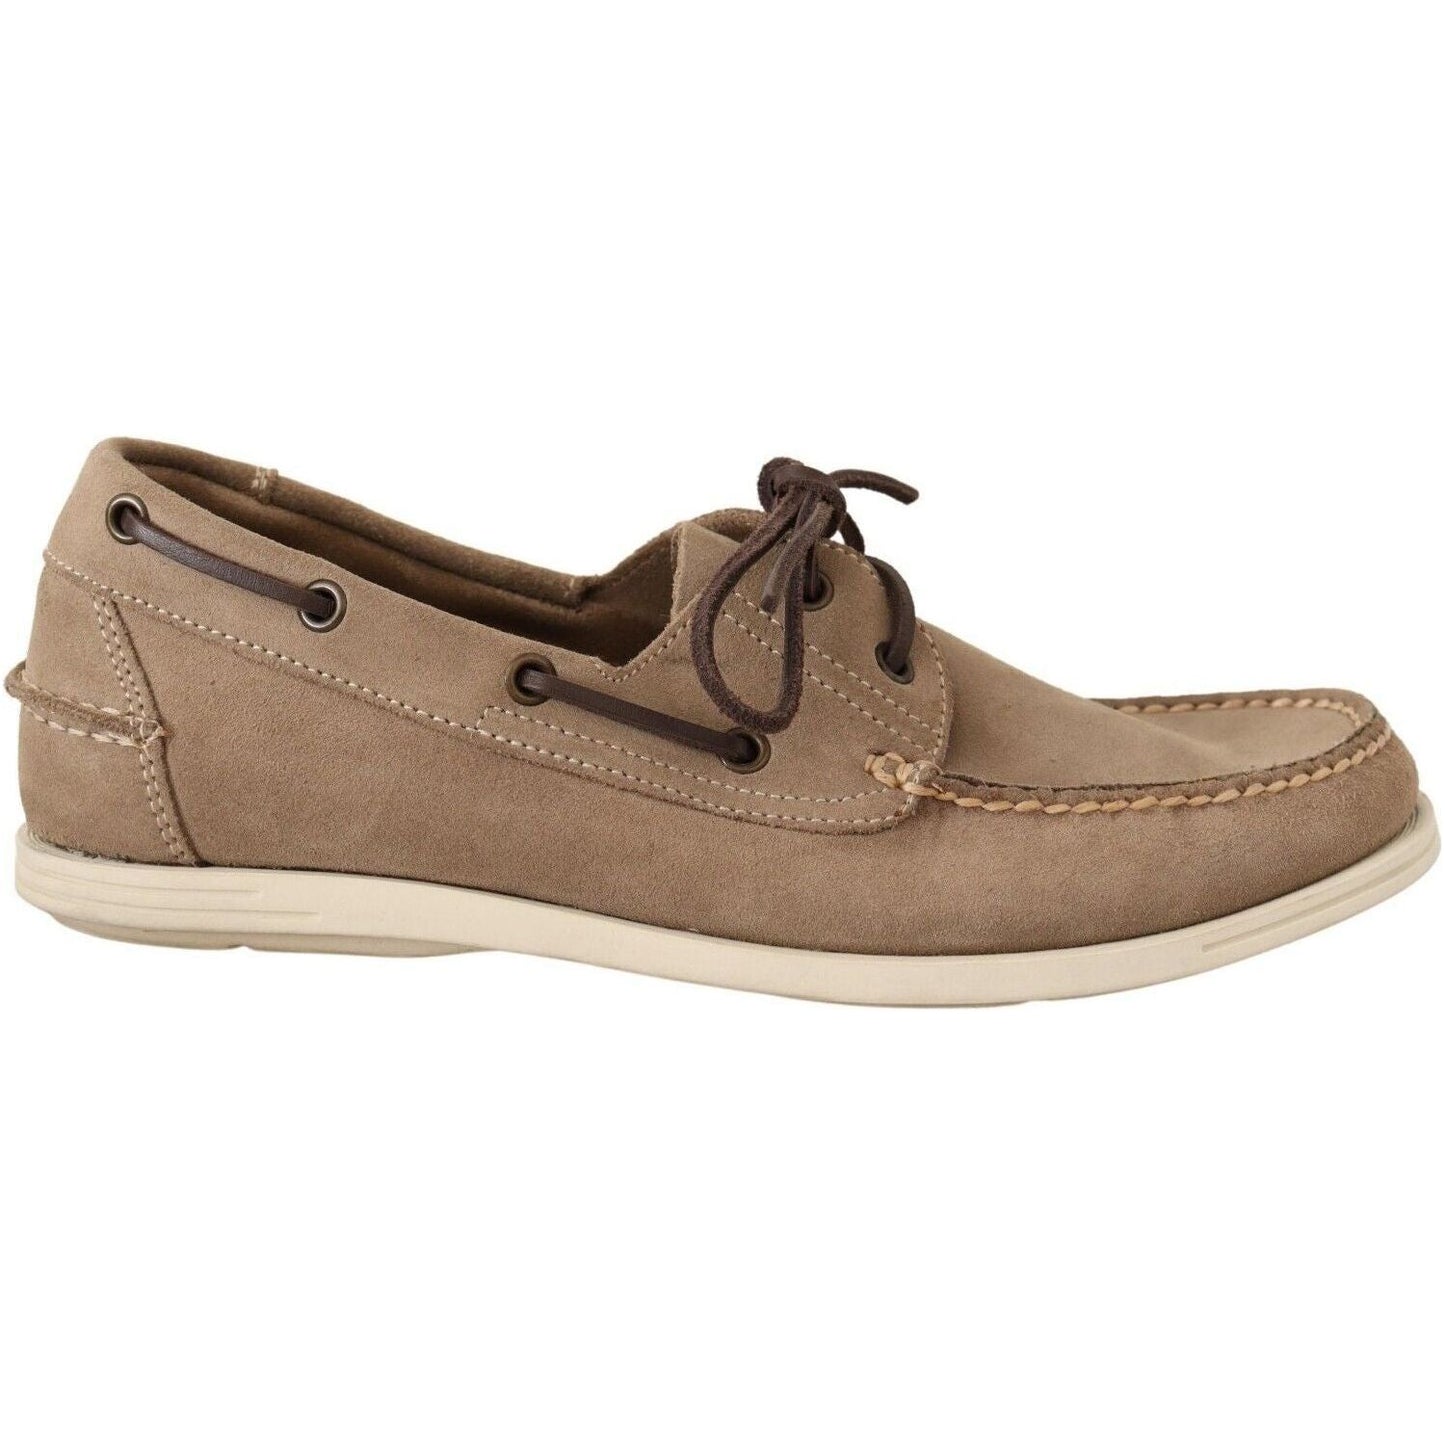 Pollini Elegant Beige Suede Moccasins for the Discerning Gentleman beige-suede-low-top-mocassin-loafers-casual-men-shoes MAN LOAFERS s-l1600-180-e6e855f0-6d7.jpg